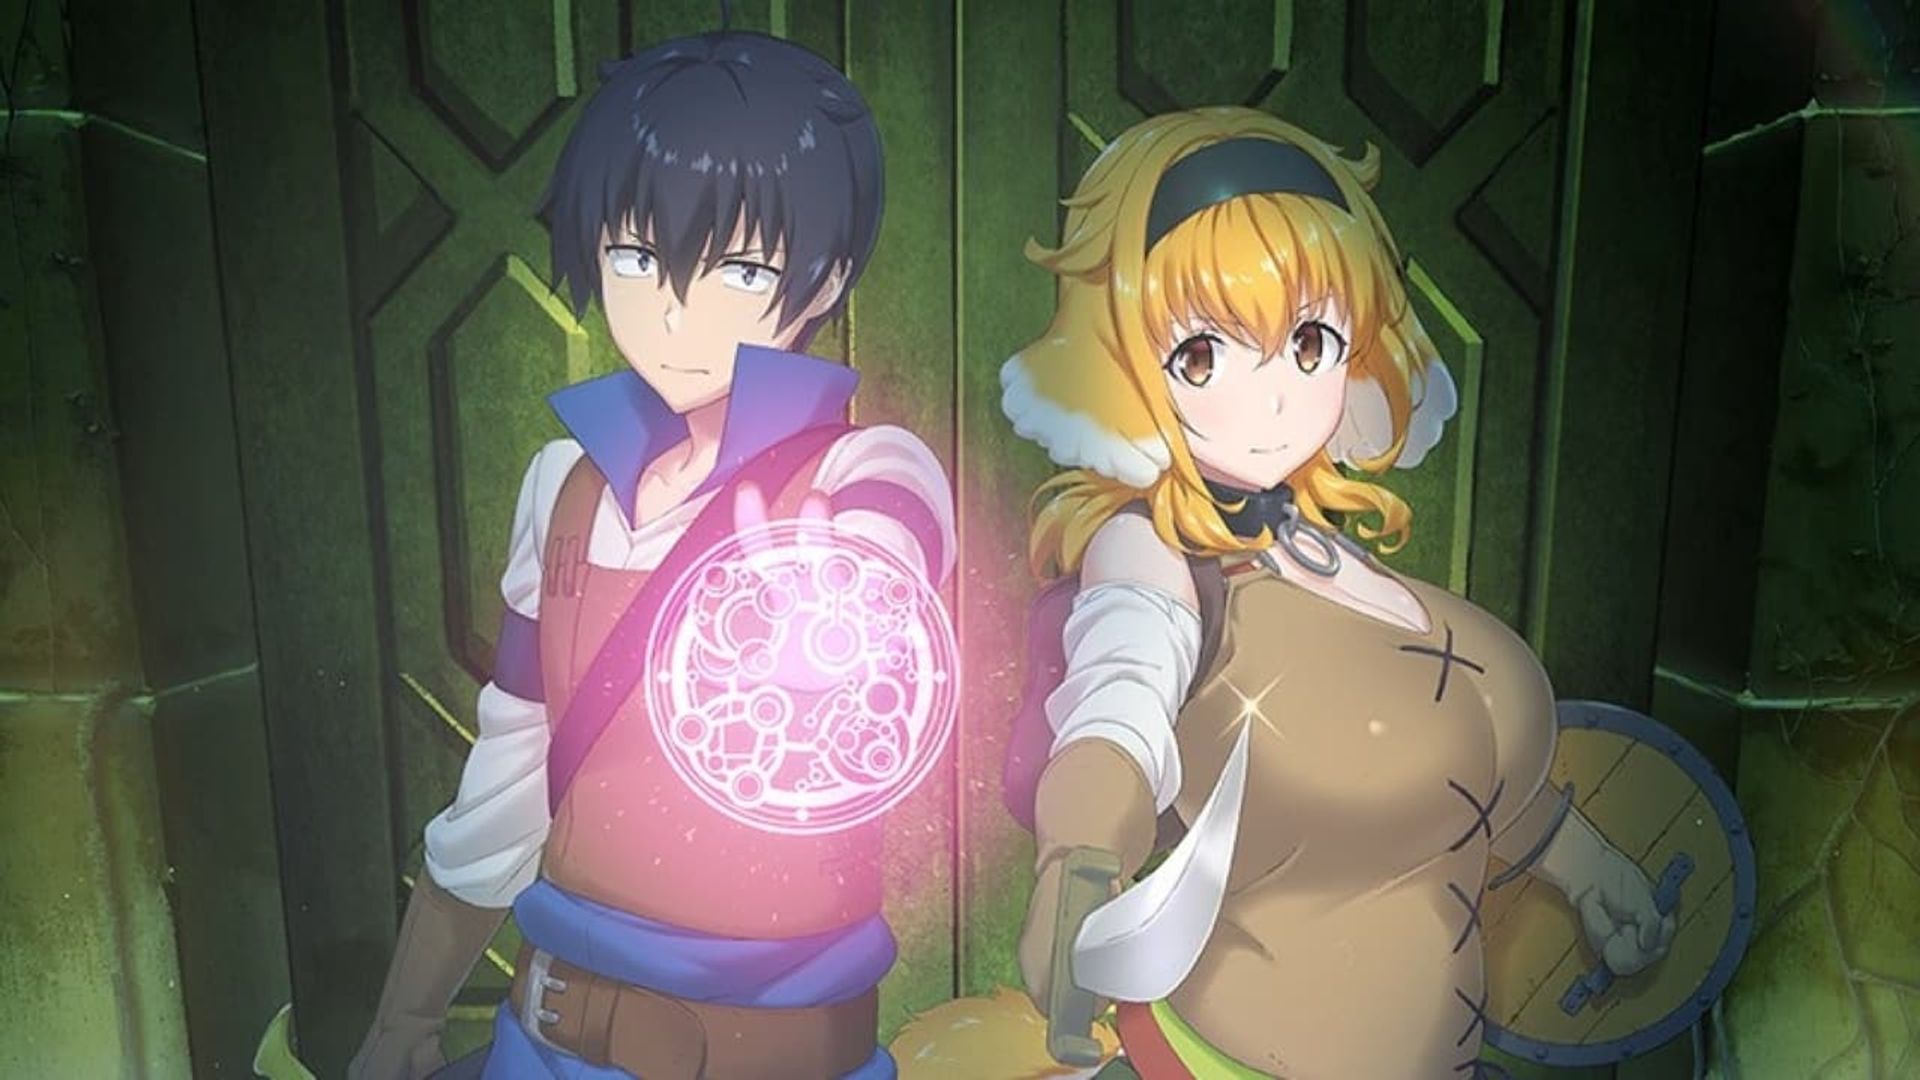 I NEED SEASON 2 RIGHT NOW!!!, Harem in the Labyrinth of Another World, Episode 12